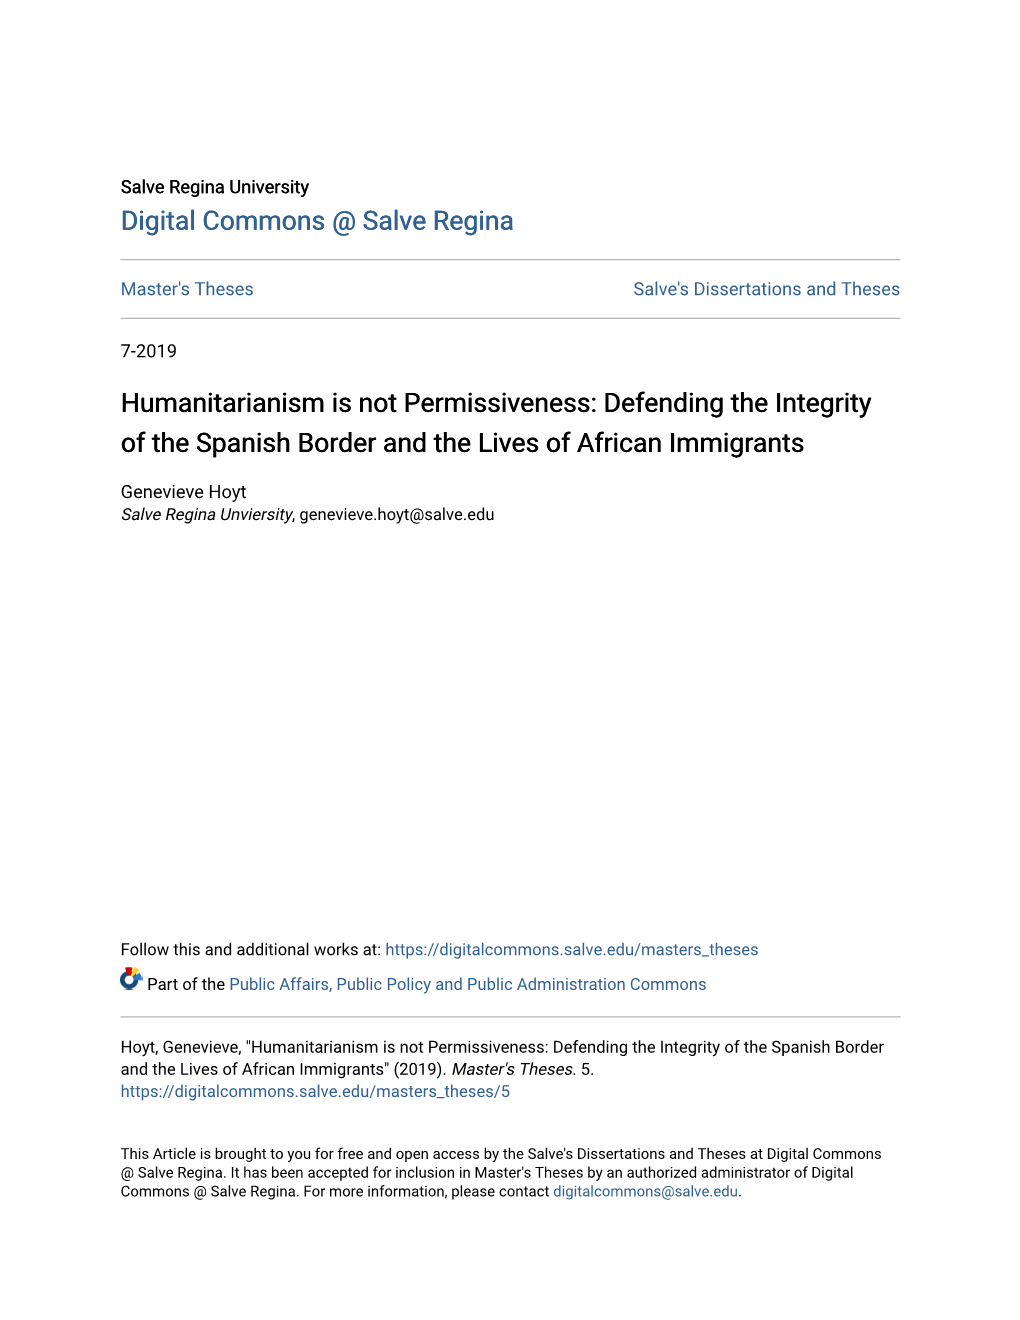 Humanitarianism Is Not Permissiveness: Defending the Integrity of the Spanish Border and the Lives of African Immigrants